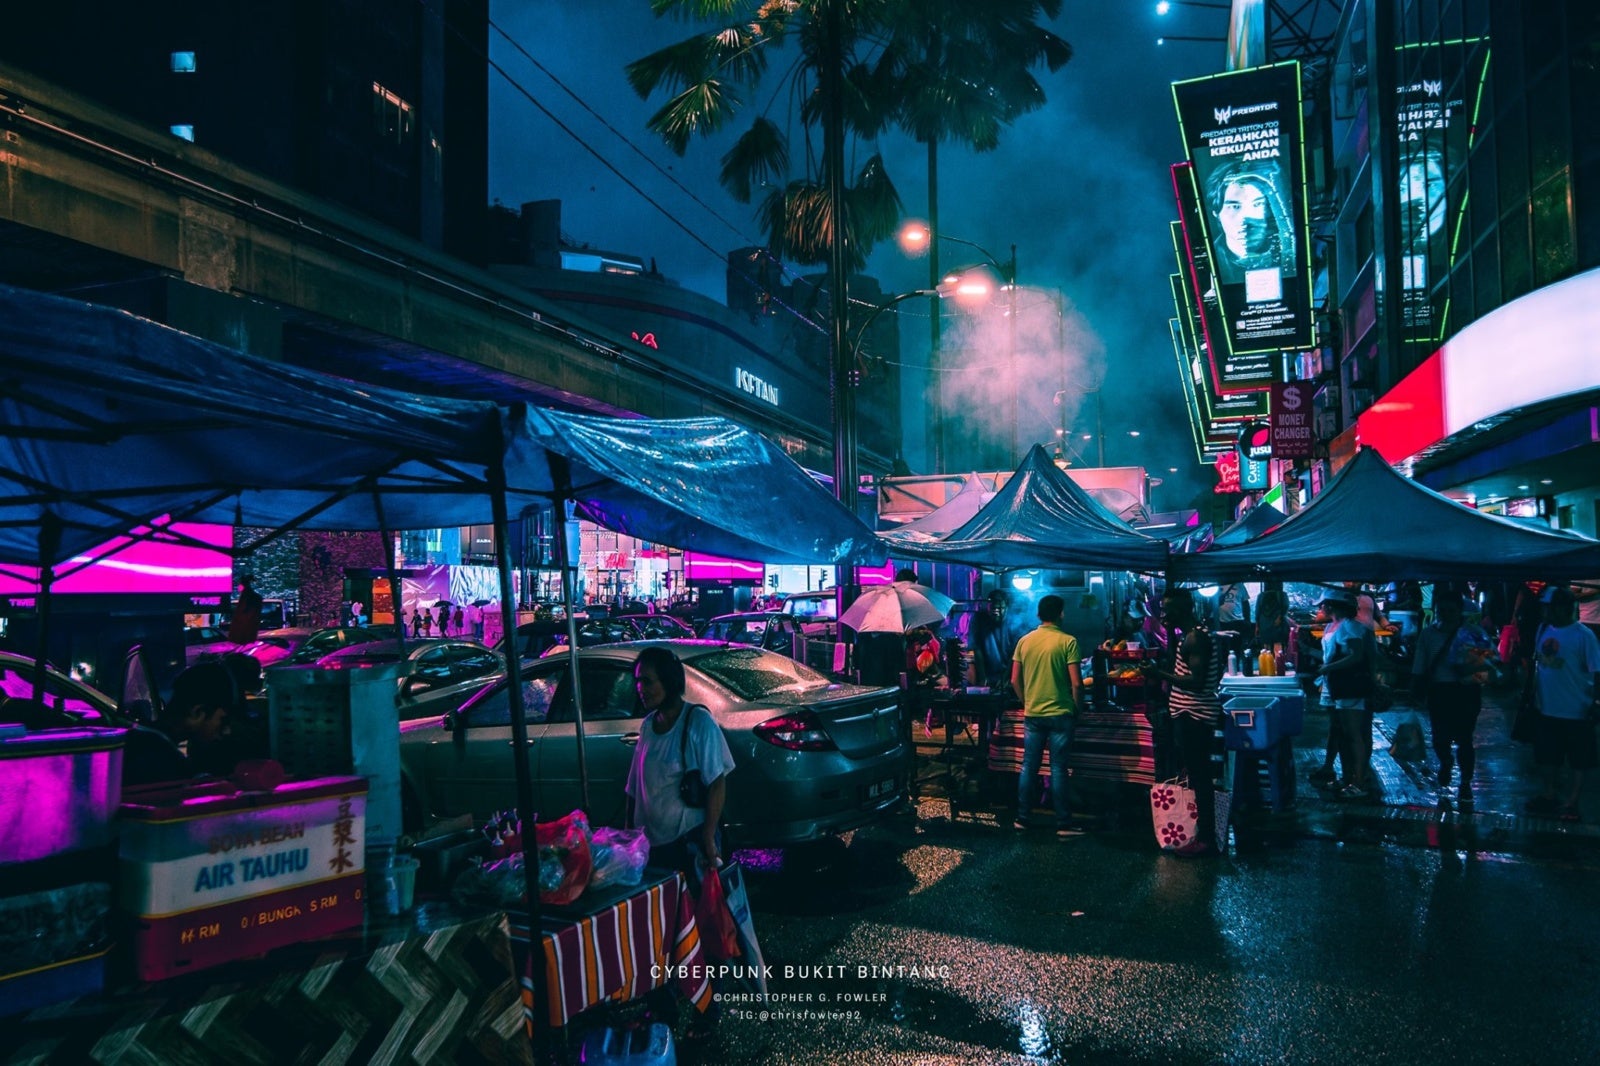 Local Photographer Gives Bukit Bintang a Cyberpunk Twist That's So Good You'd Wish It Was Real Life - WORLD OF BUZZ 3